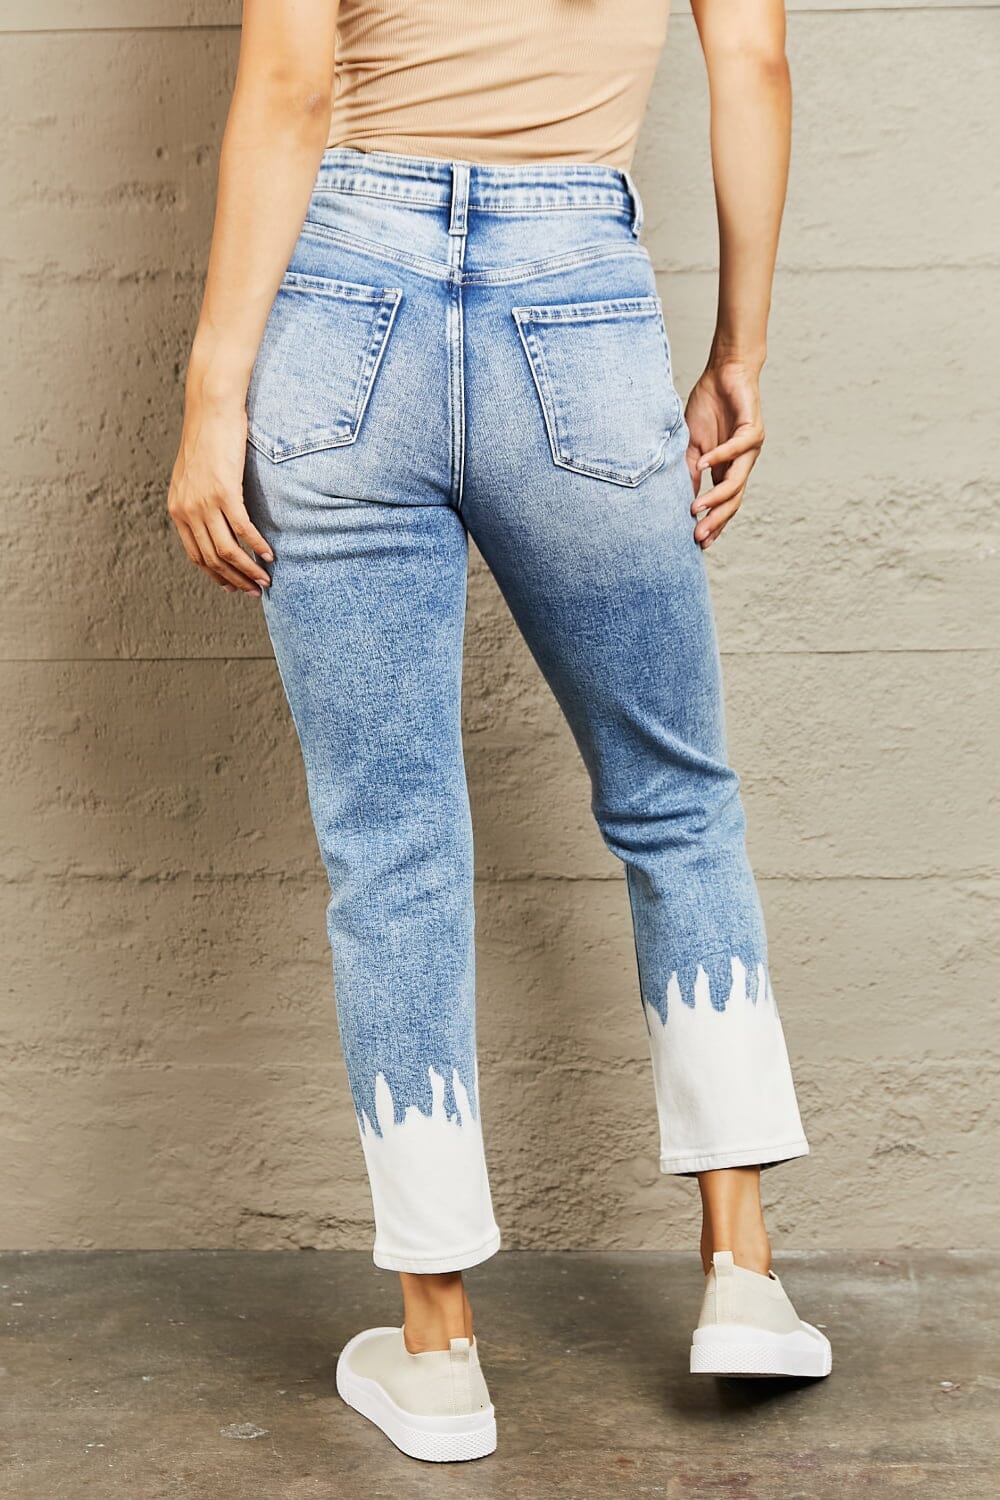 BAYEAS Medium Blue High Waisted Distressed Painted Cropped Skinny Jeans jeans jehouze 